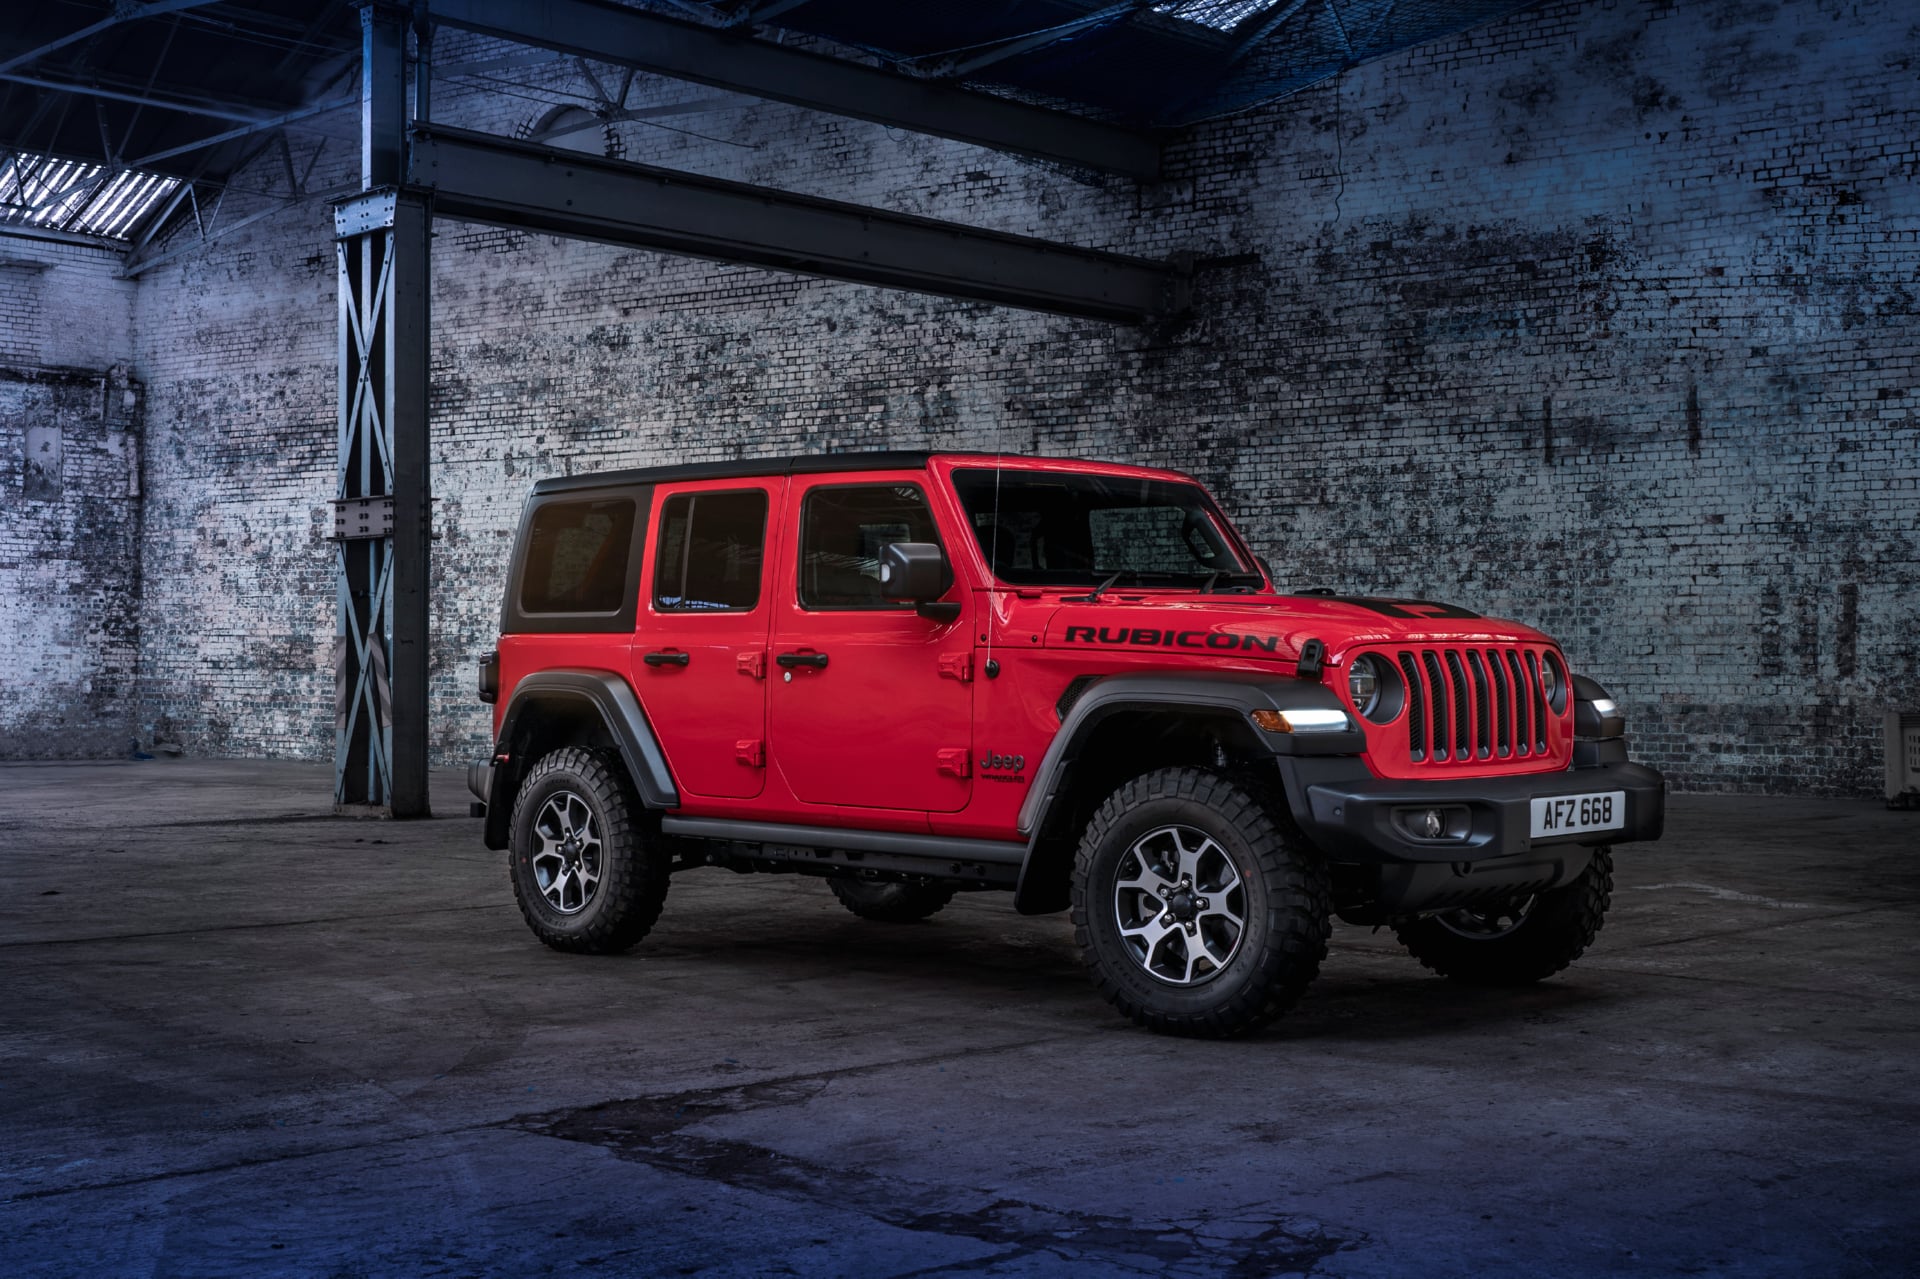 Jeep Wrangler Unlimited Rubicon 1941 wallpapers HD quality